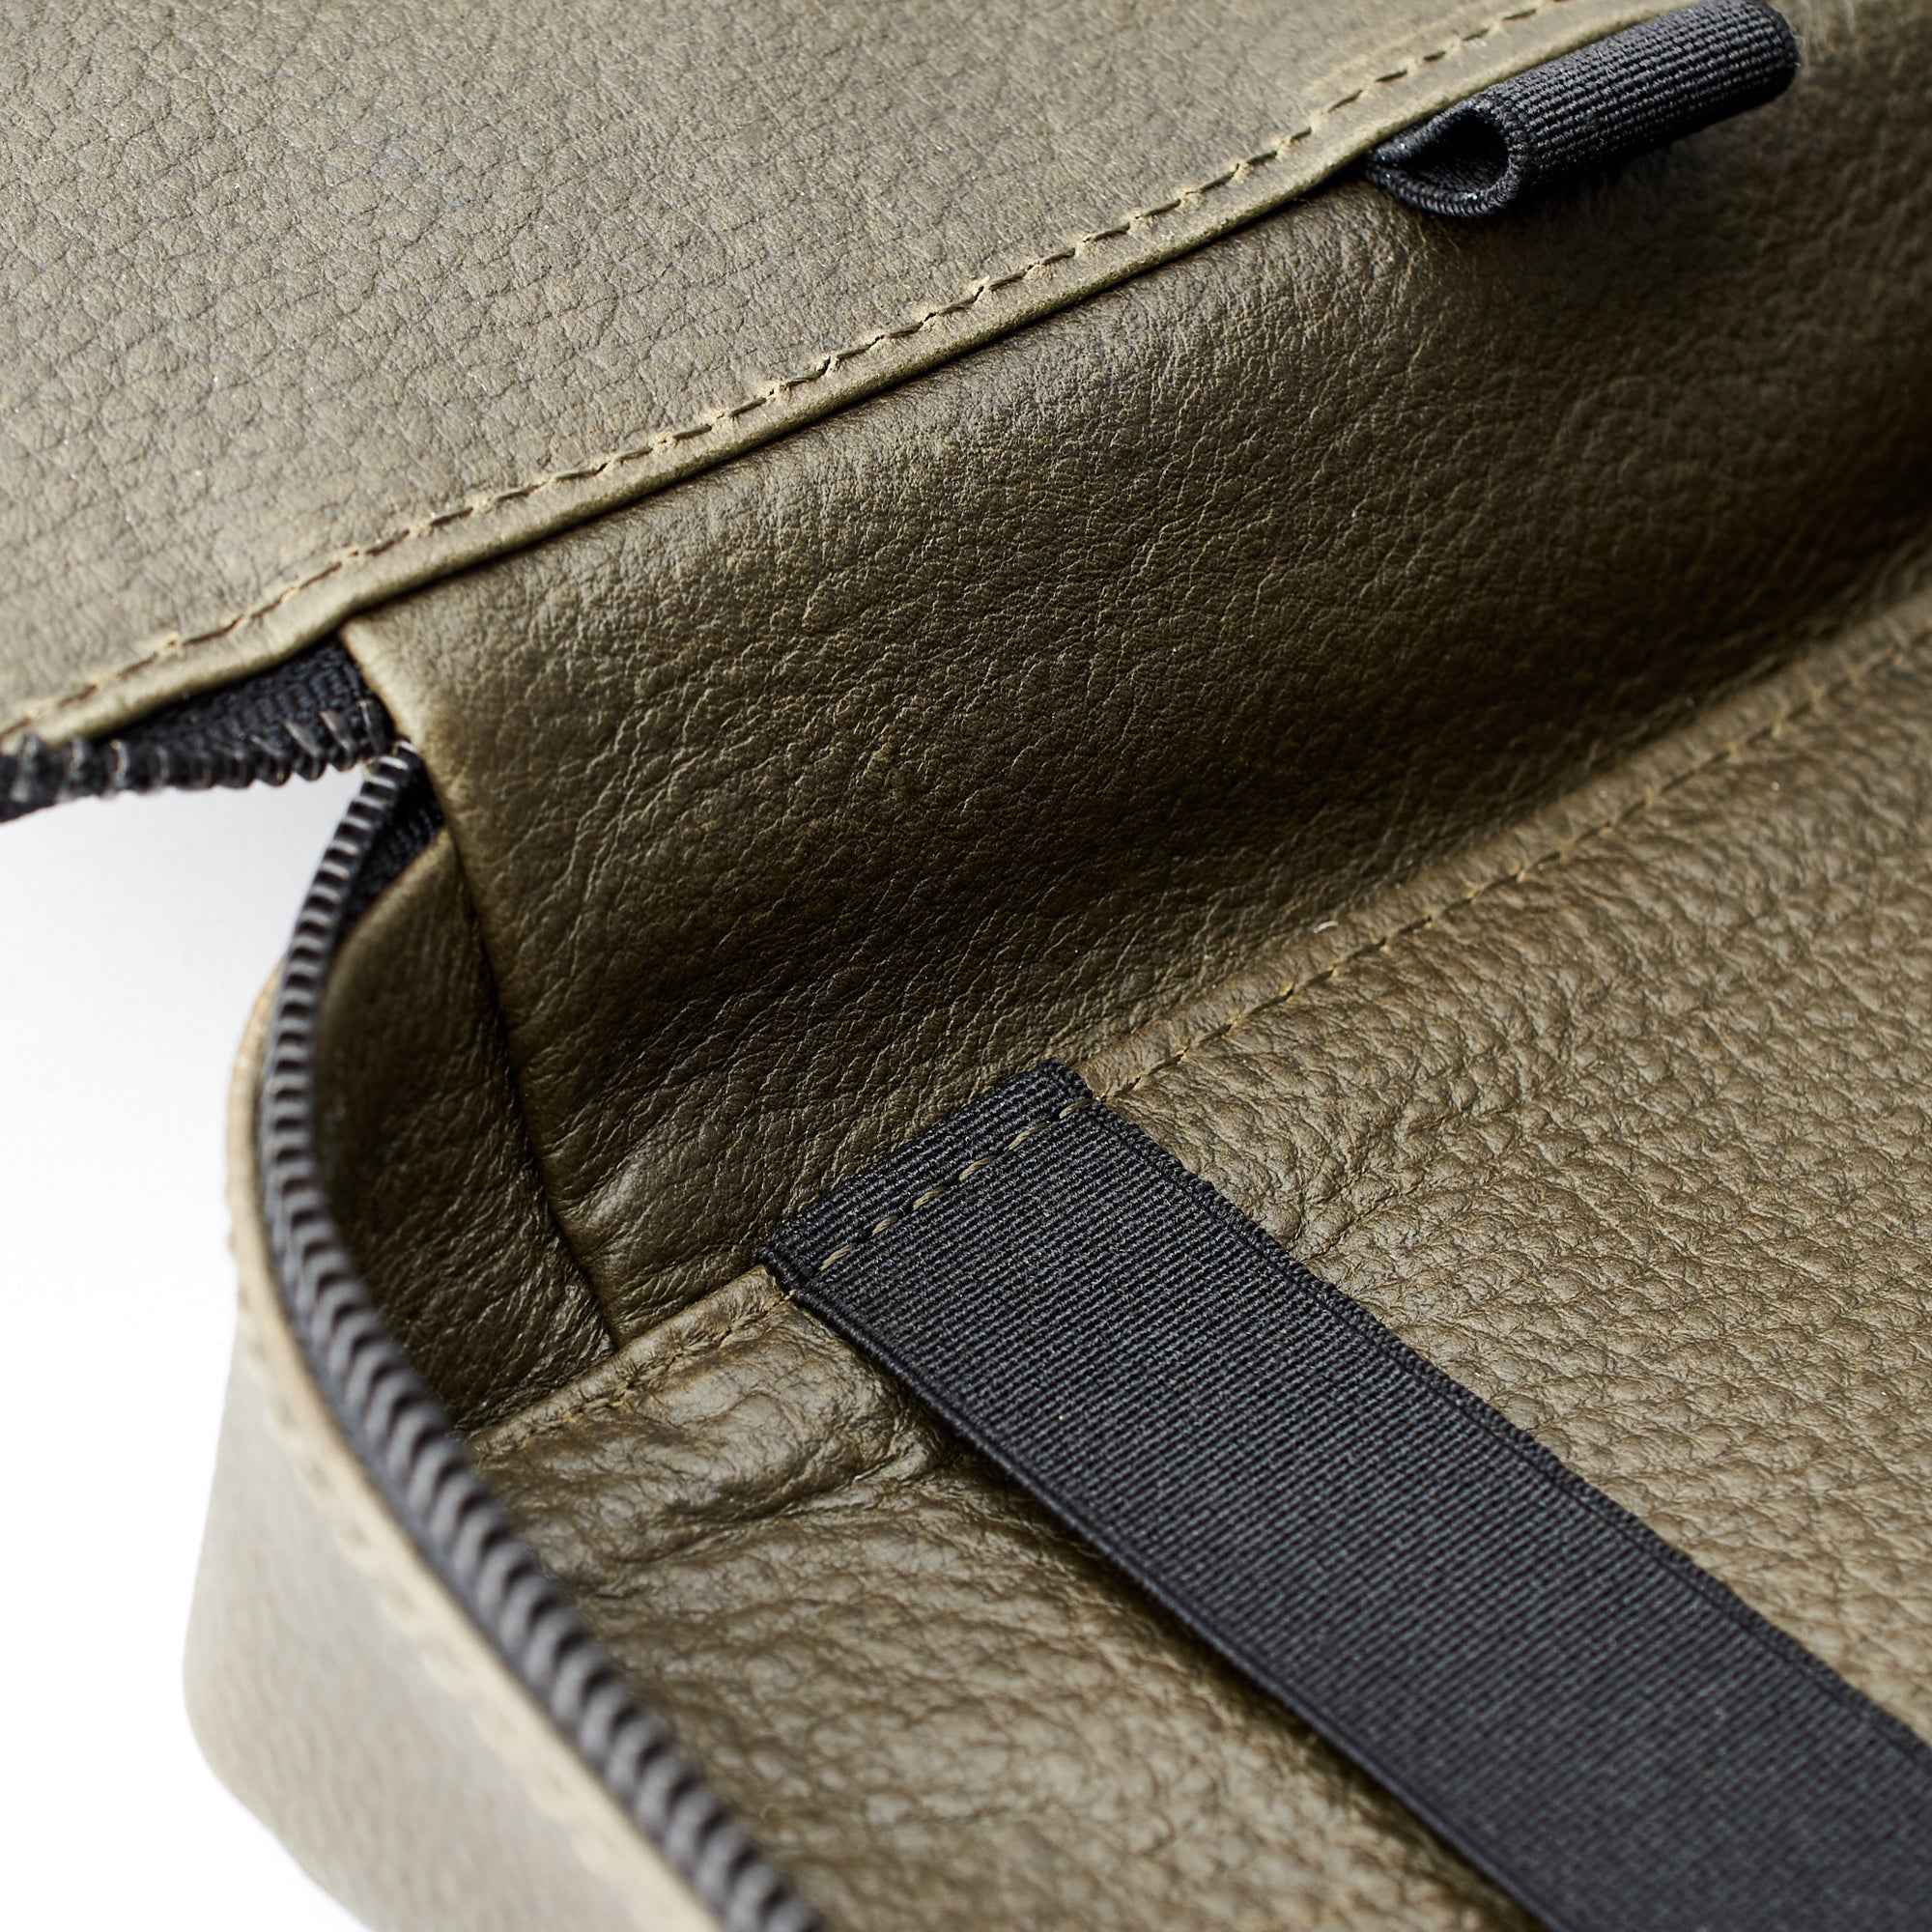 Leather interior. Green EDC bag essentials by Capra Leather. Fits iPad Pro with Apple pencil.